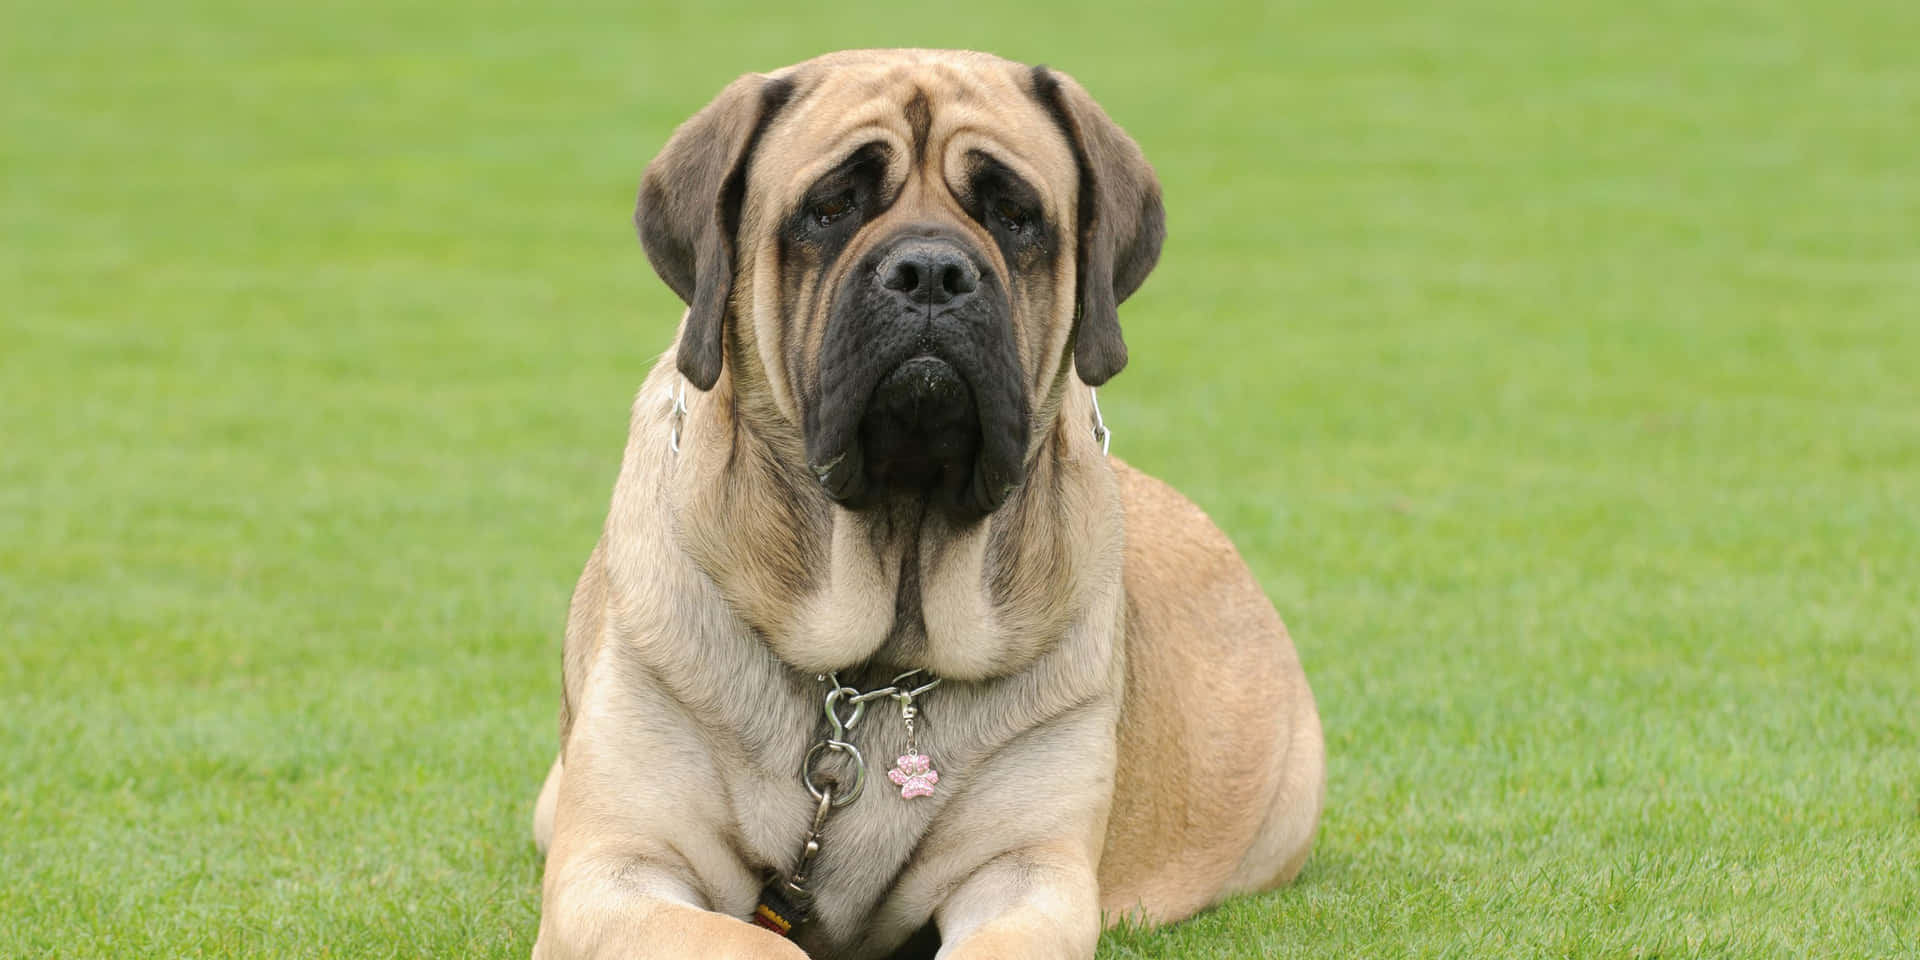 Stately and proud, the English Mastiff stands tall.